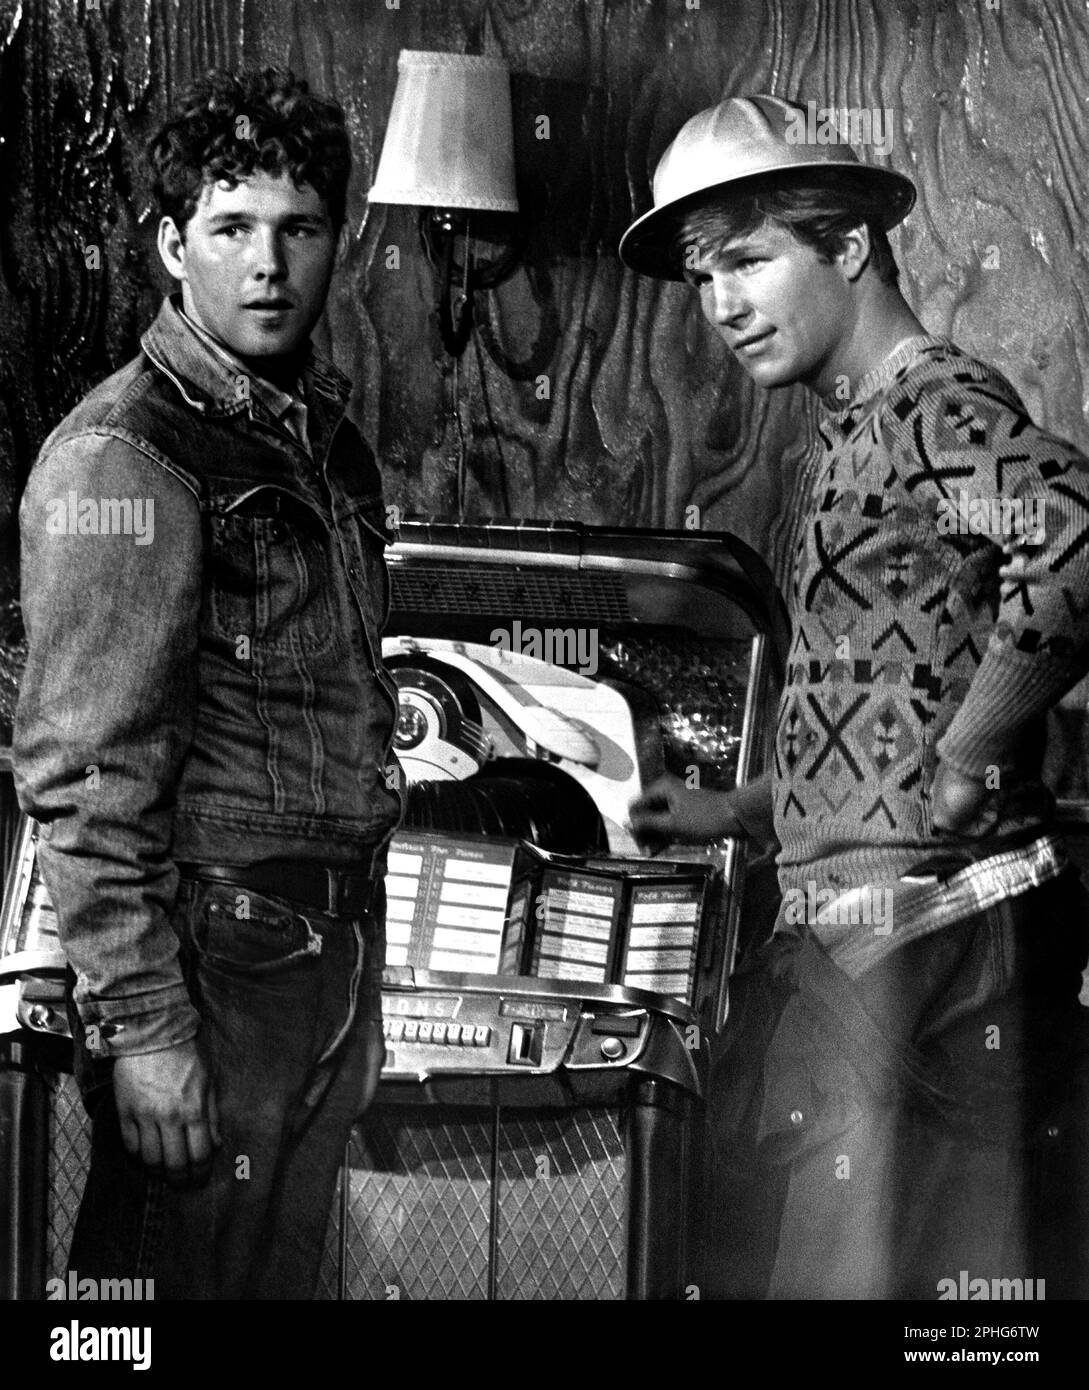 JEFF BRIDGES and TIMOTHY BOTTOMS in THE LAST PICTURE SHOW (1971), directed by PETER BOGDANOVICH. Credit: COLUMBIA PICTURES / Album Stock Photo